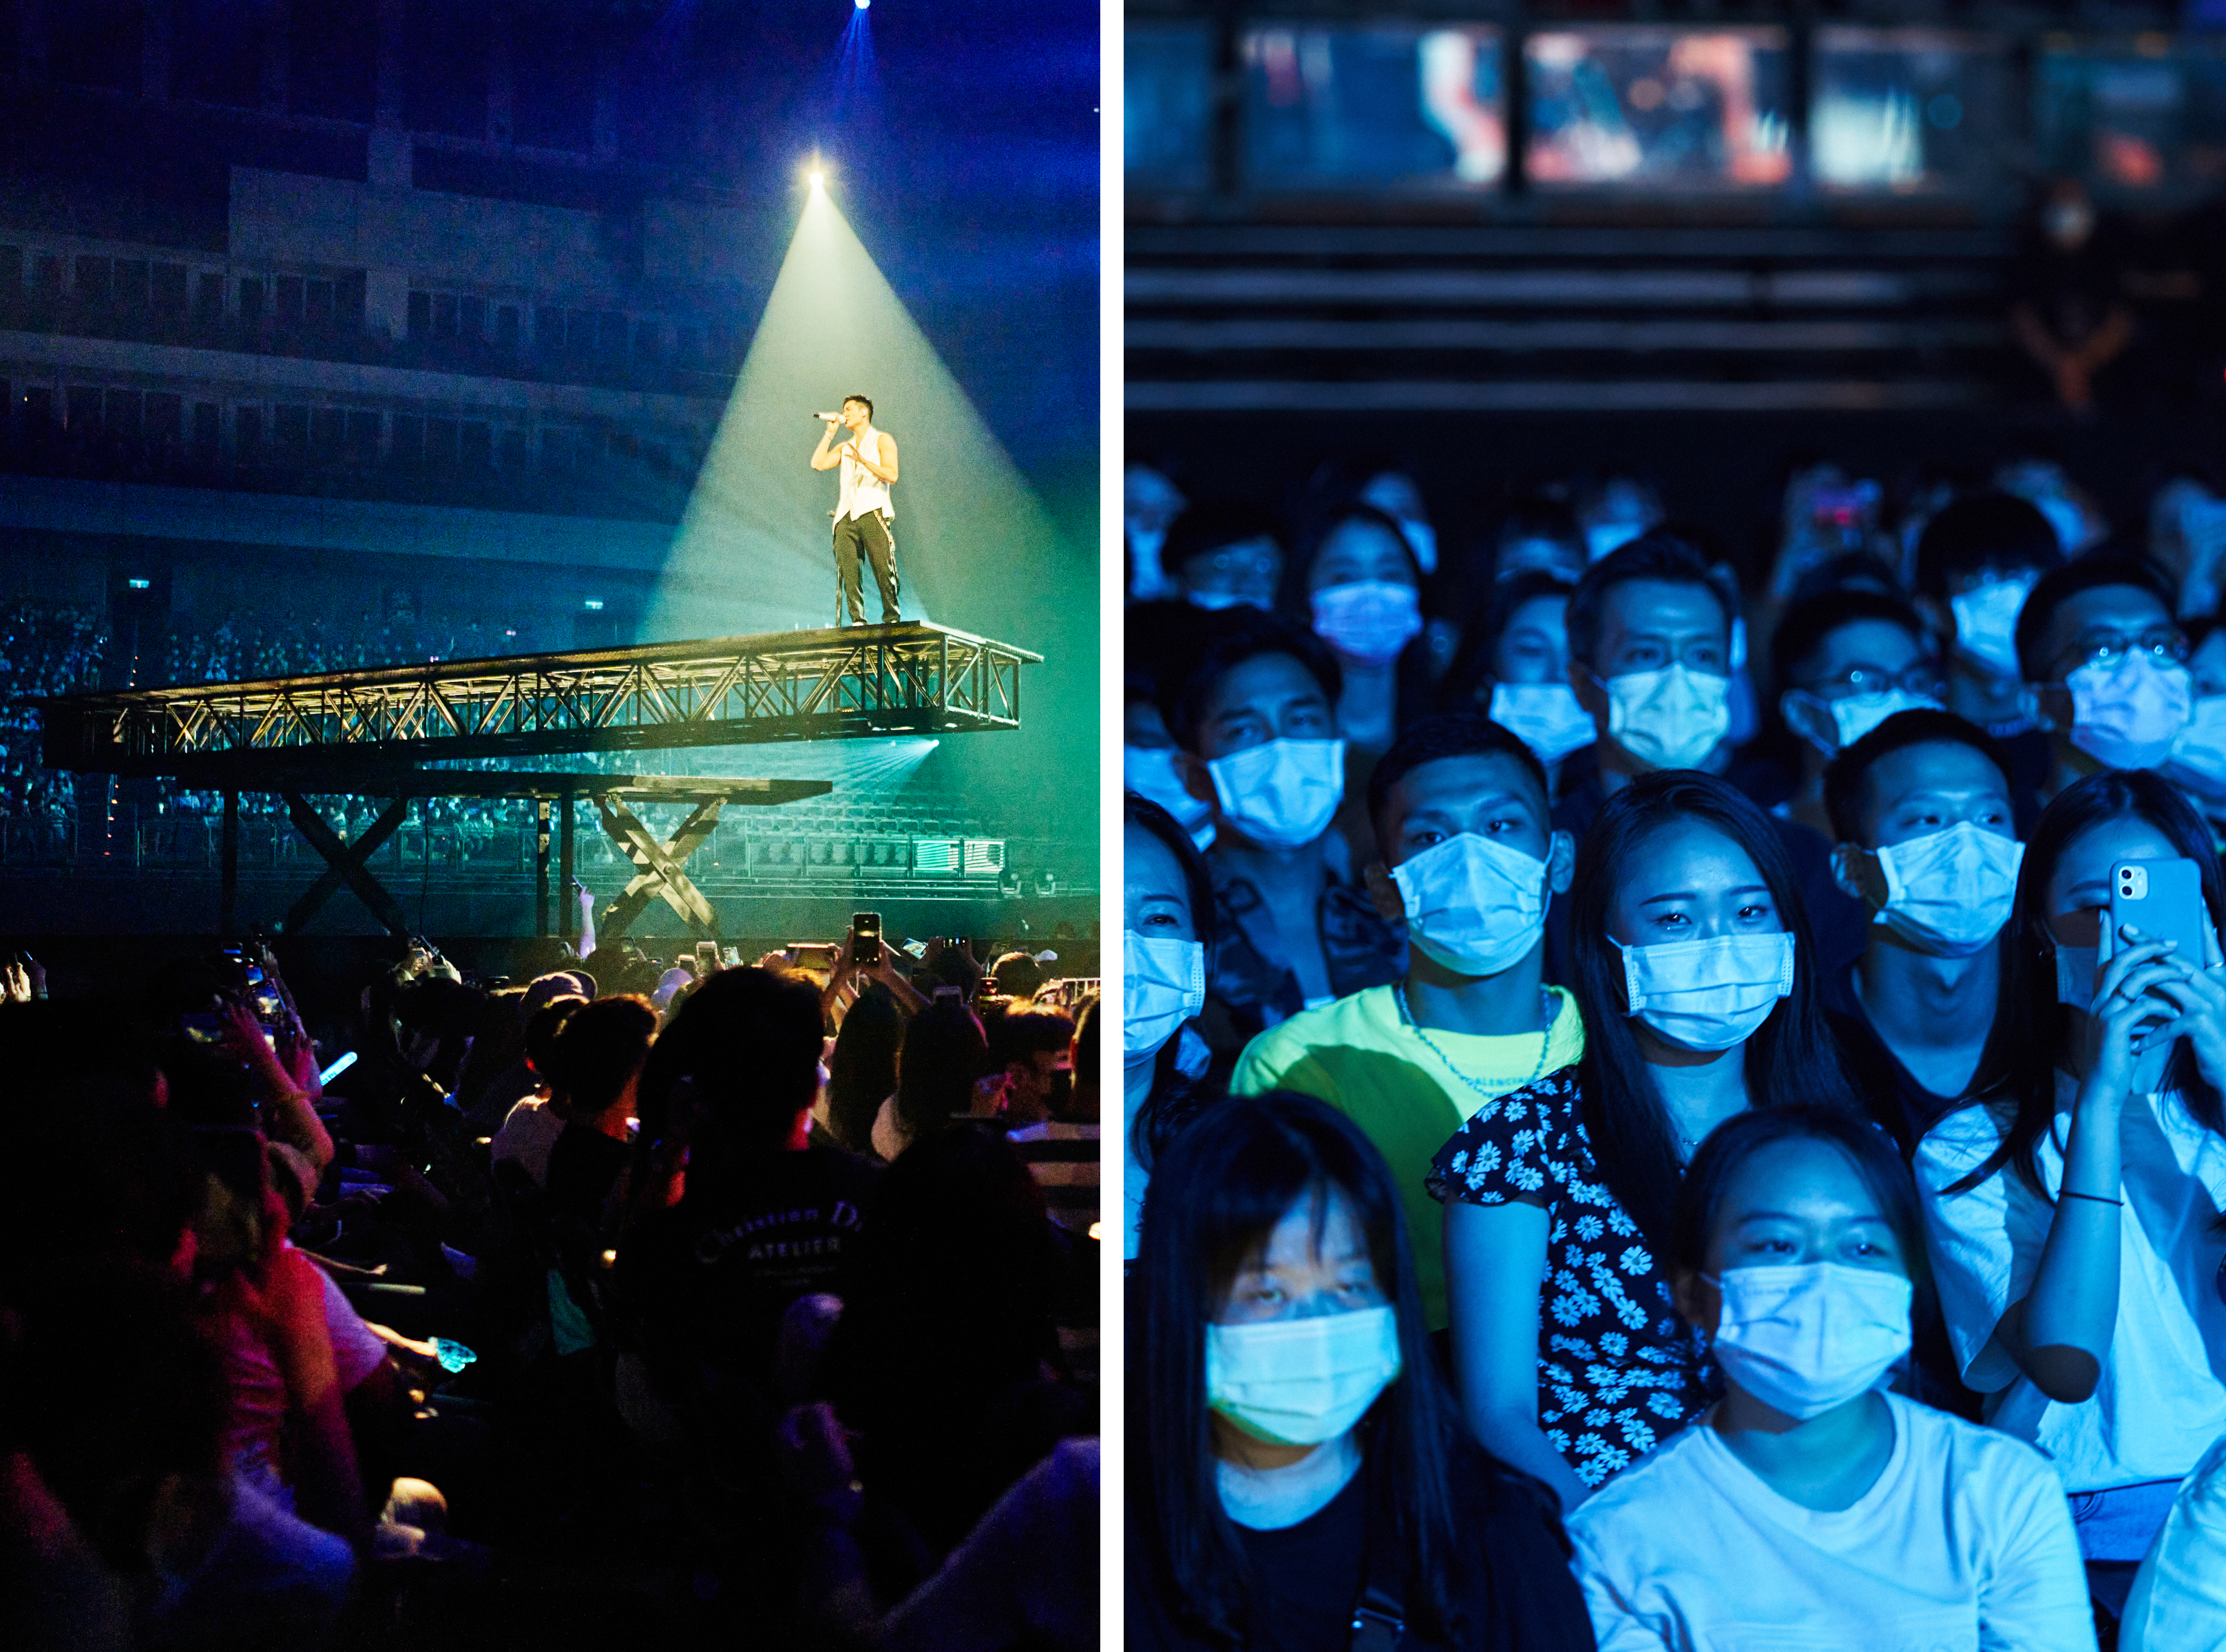 Left: Chou sings on an extended platform that rotated above concertgoers. Right: Attendees watch the live show from their seats, in masks